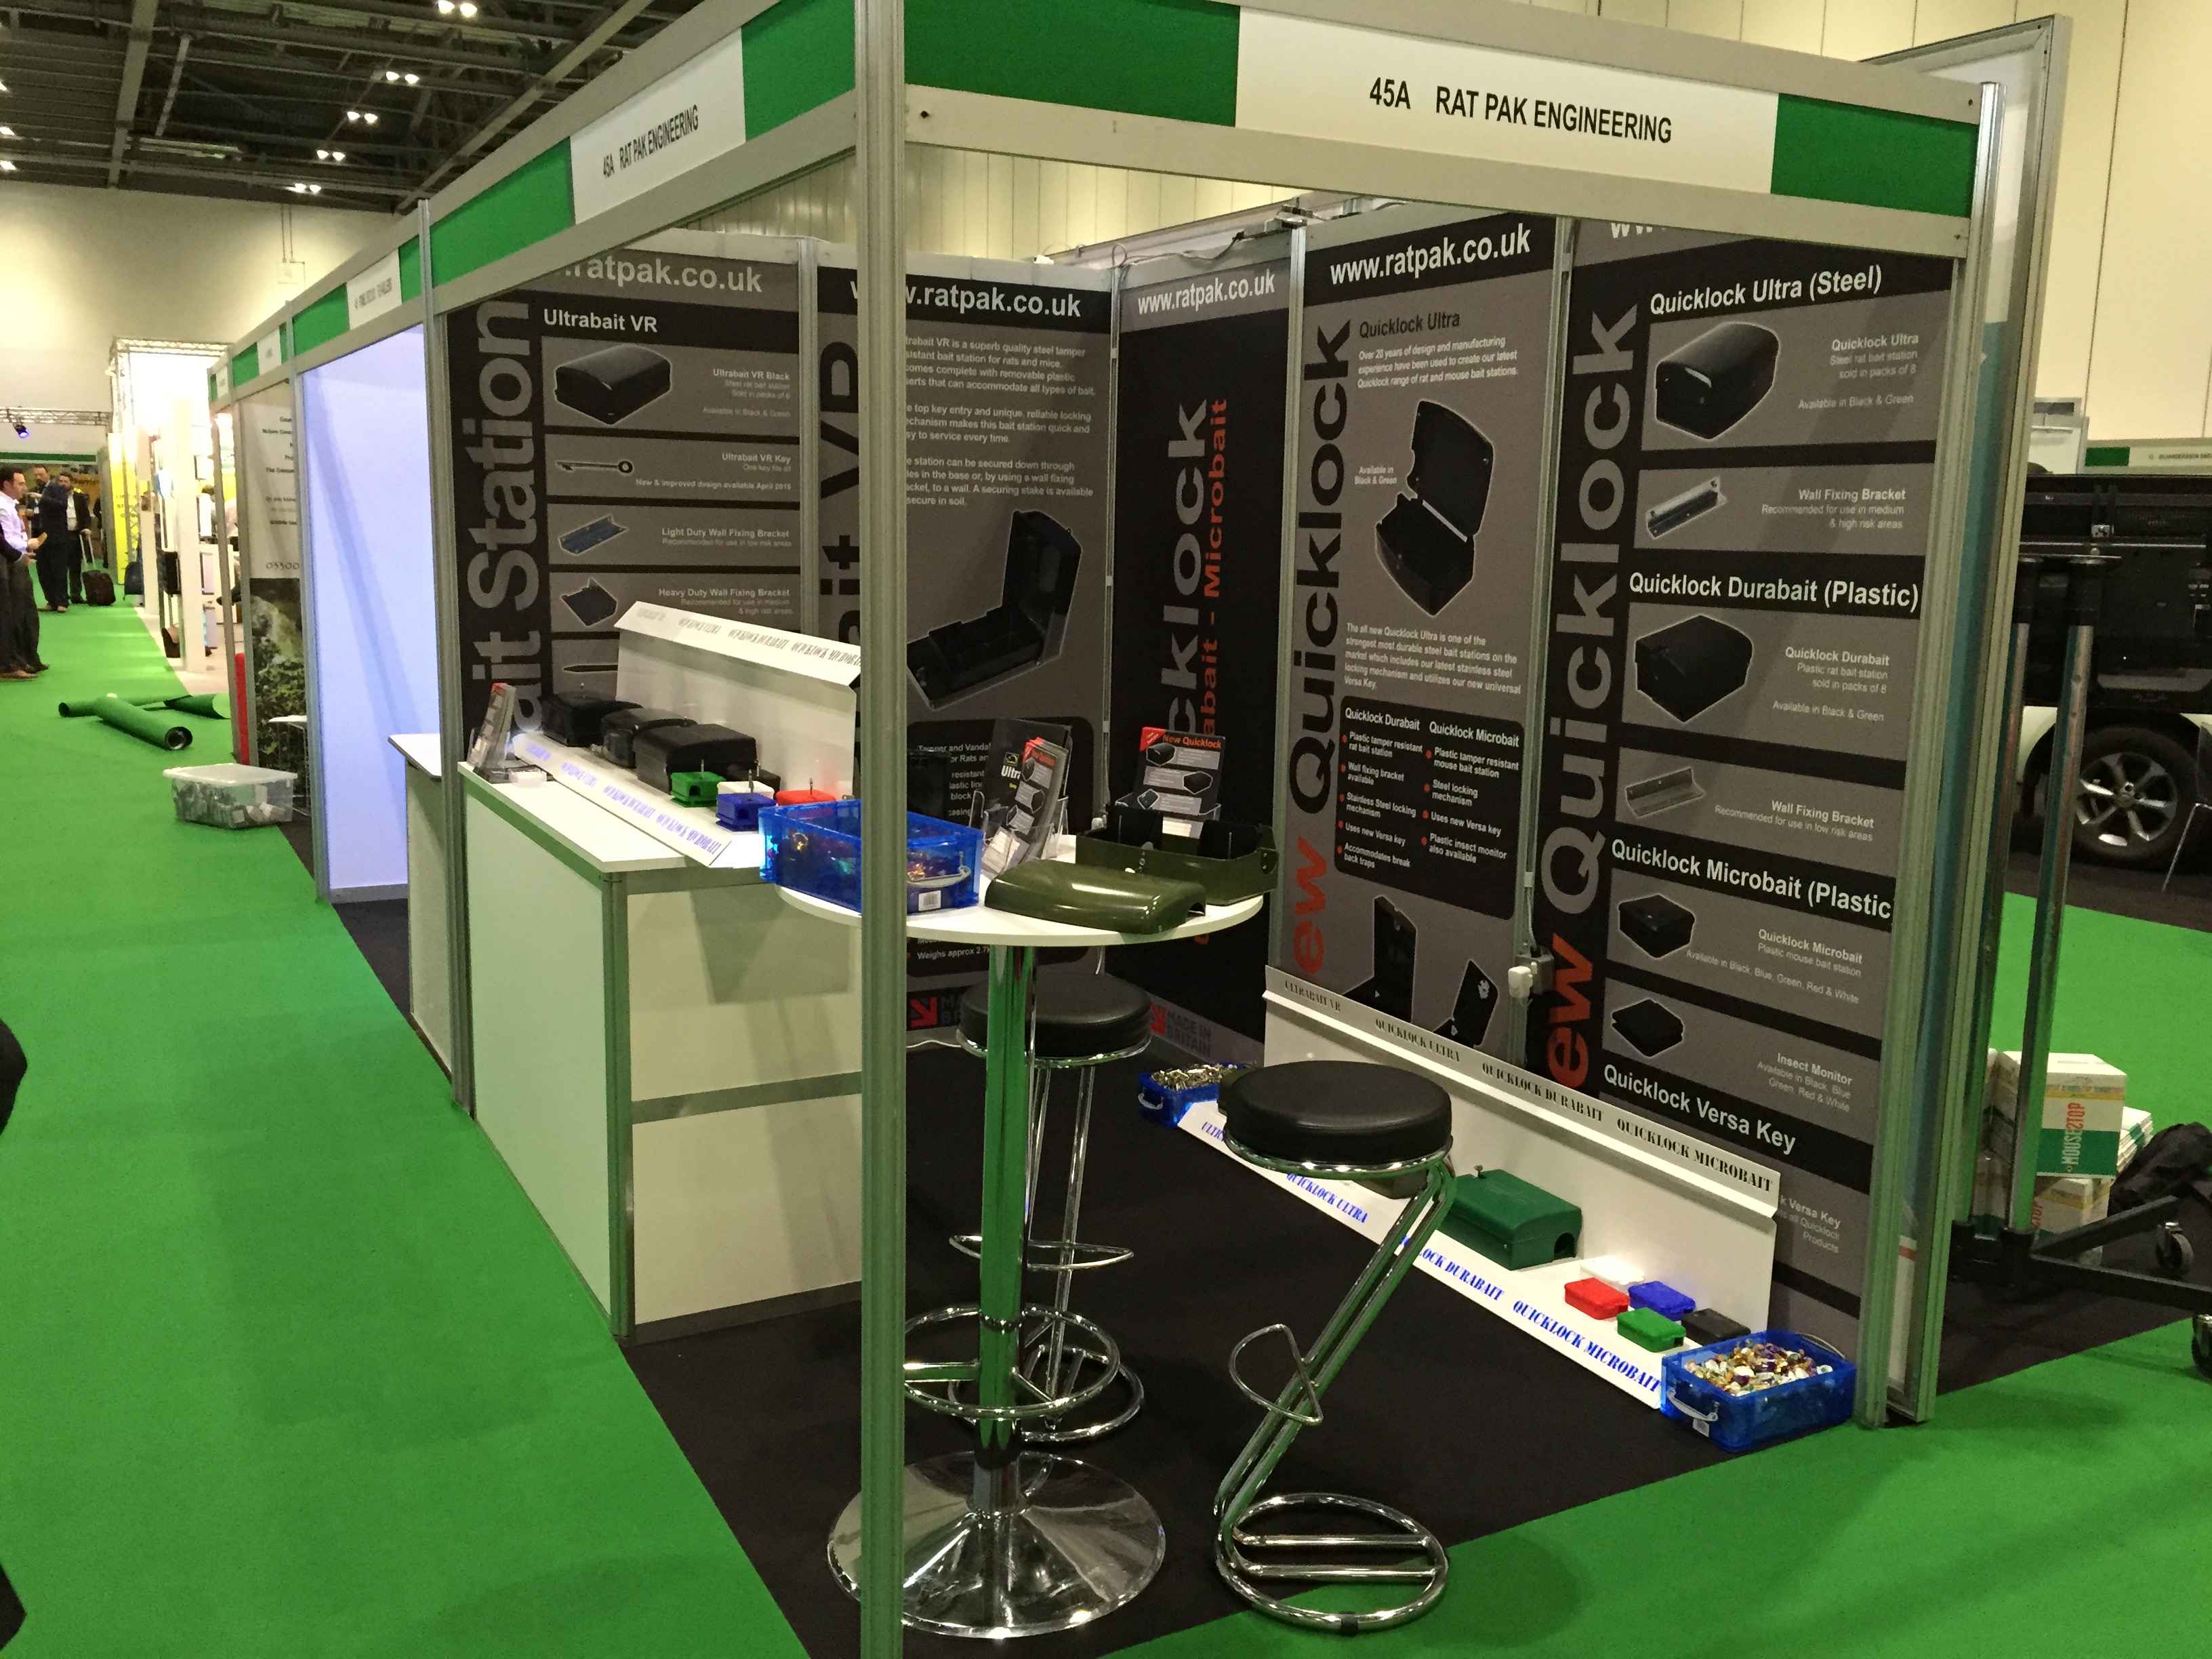 Excel London 25-26 March 2015